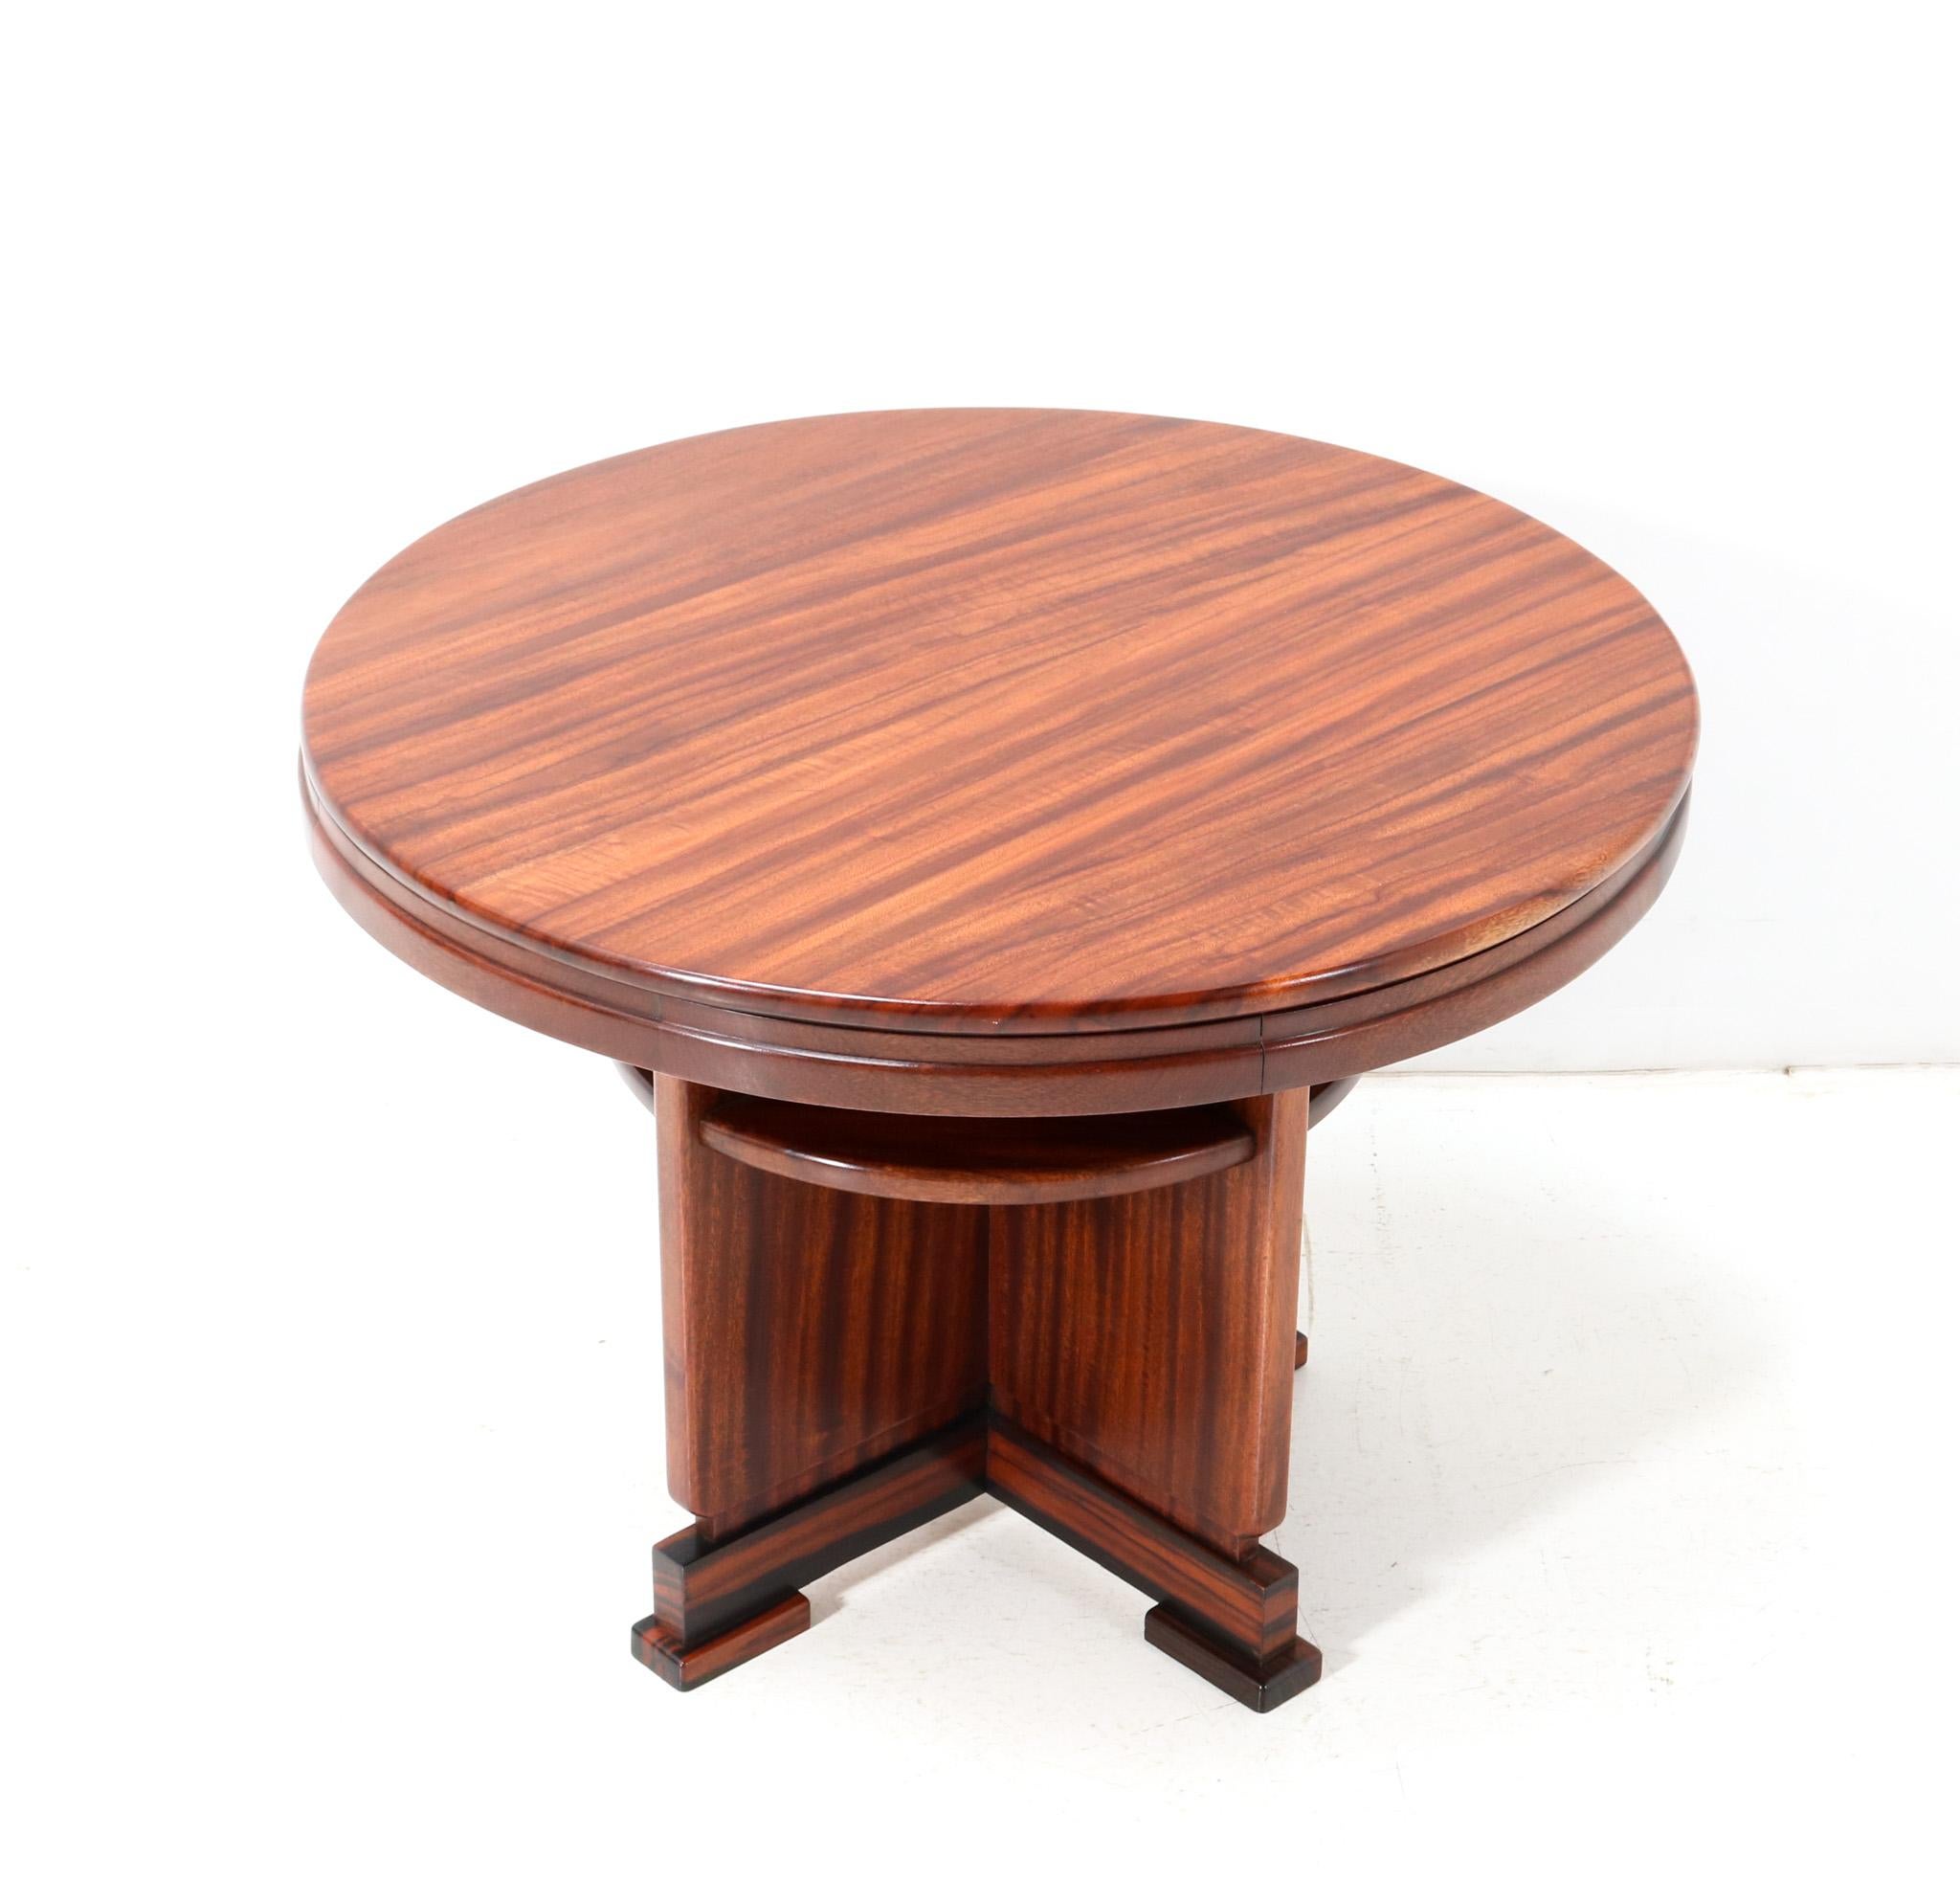 Stunning and rare Art Deco Amsterdamse School coffee table or cocktail table.
Striking Dutch design from the 1920s.
Solid padouk base with original padouk veneered top.
Solid macassar ebony and original macassar ebony veneered elements.
This